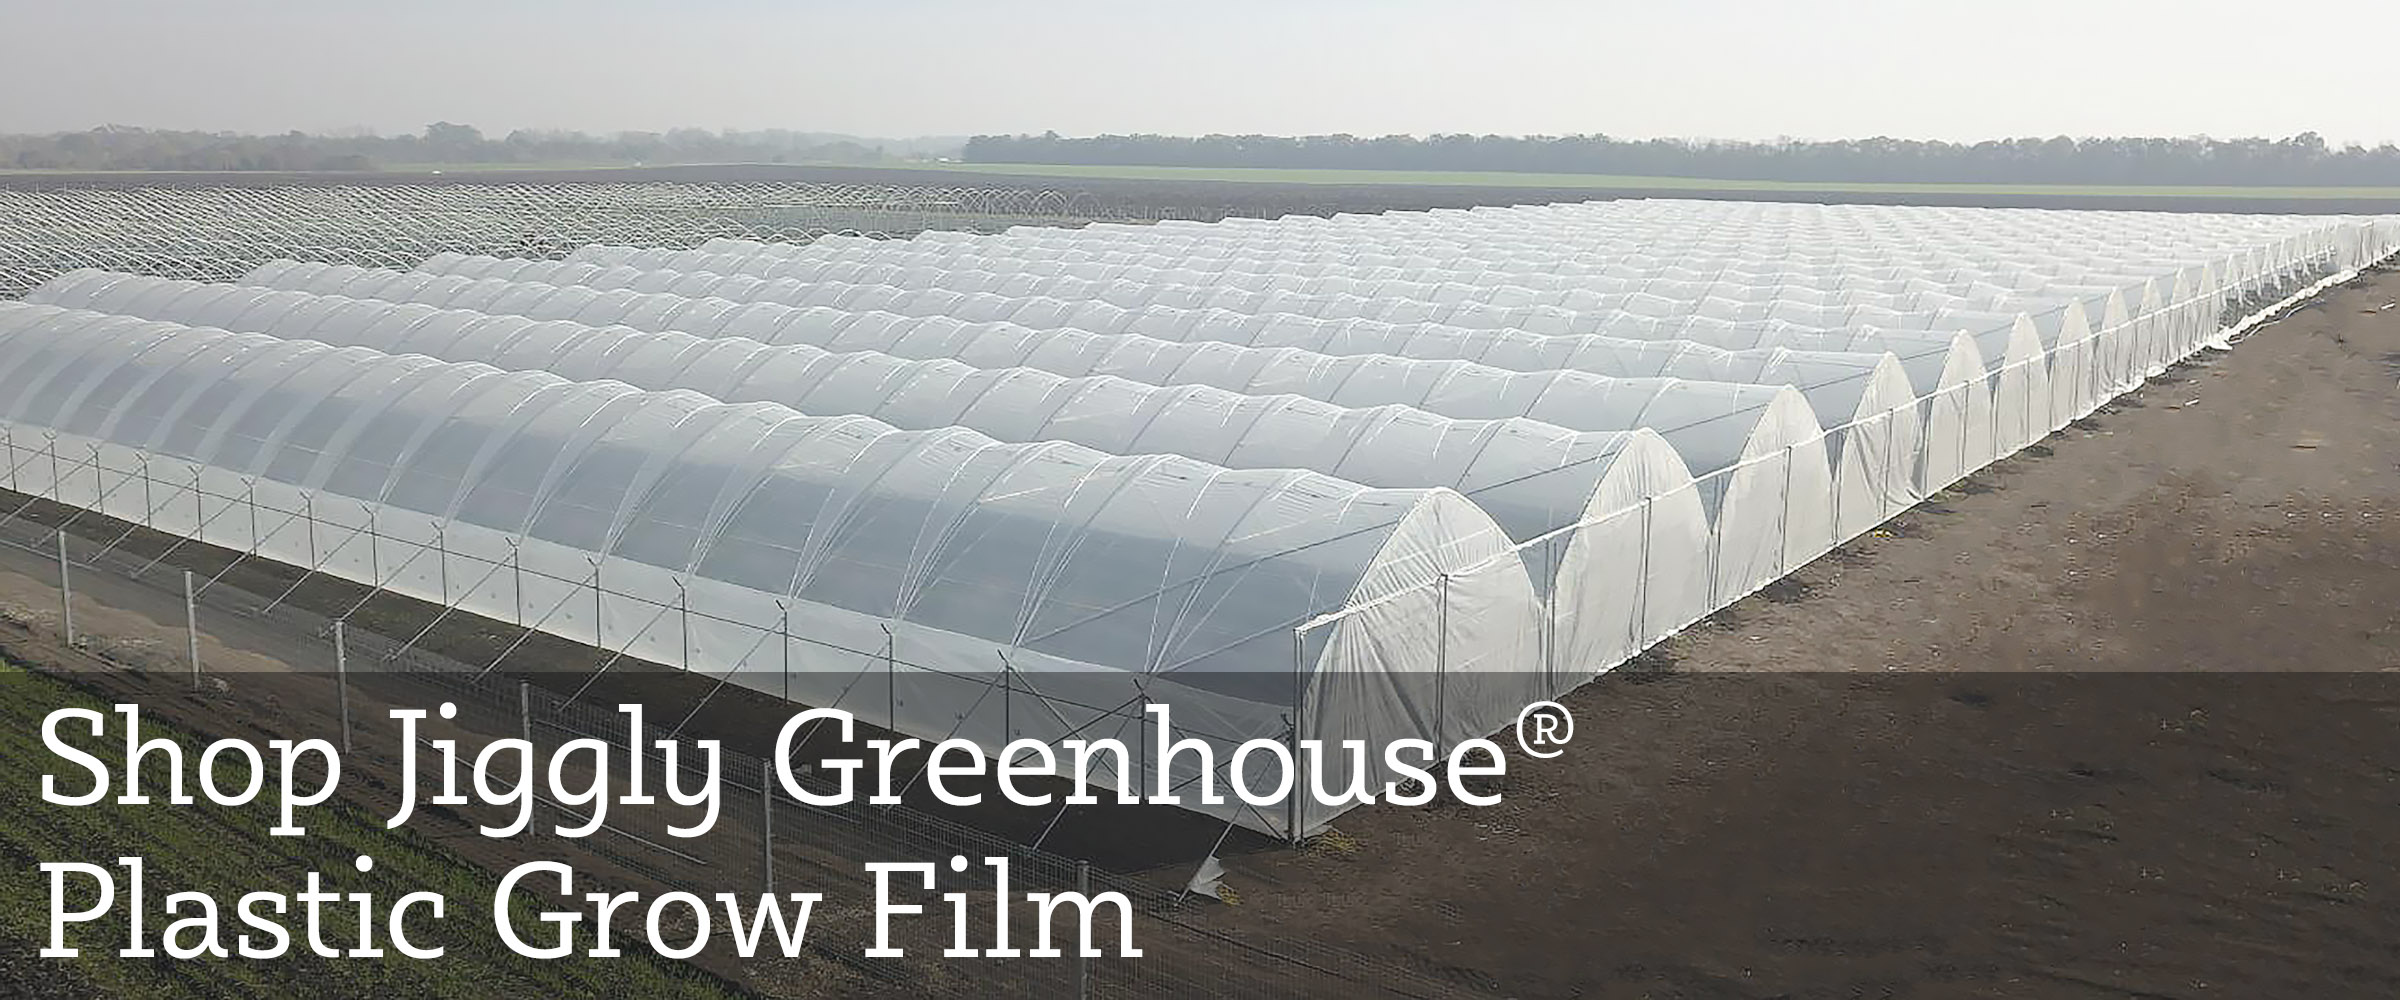 Check Out Our Jiggly Greenhouse Poly Plastic Greenhouse Grow Film!